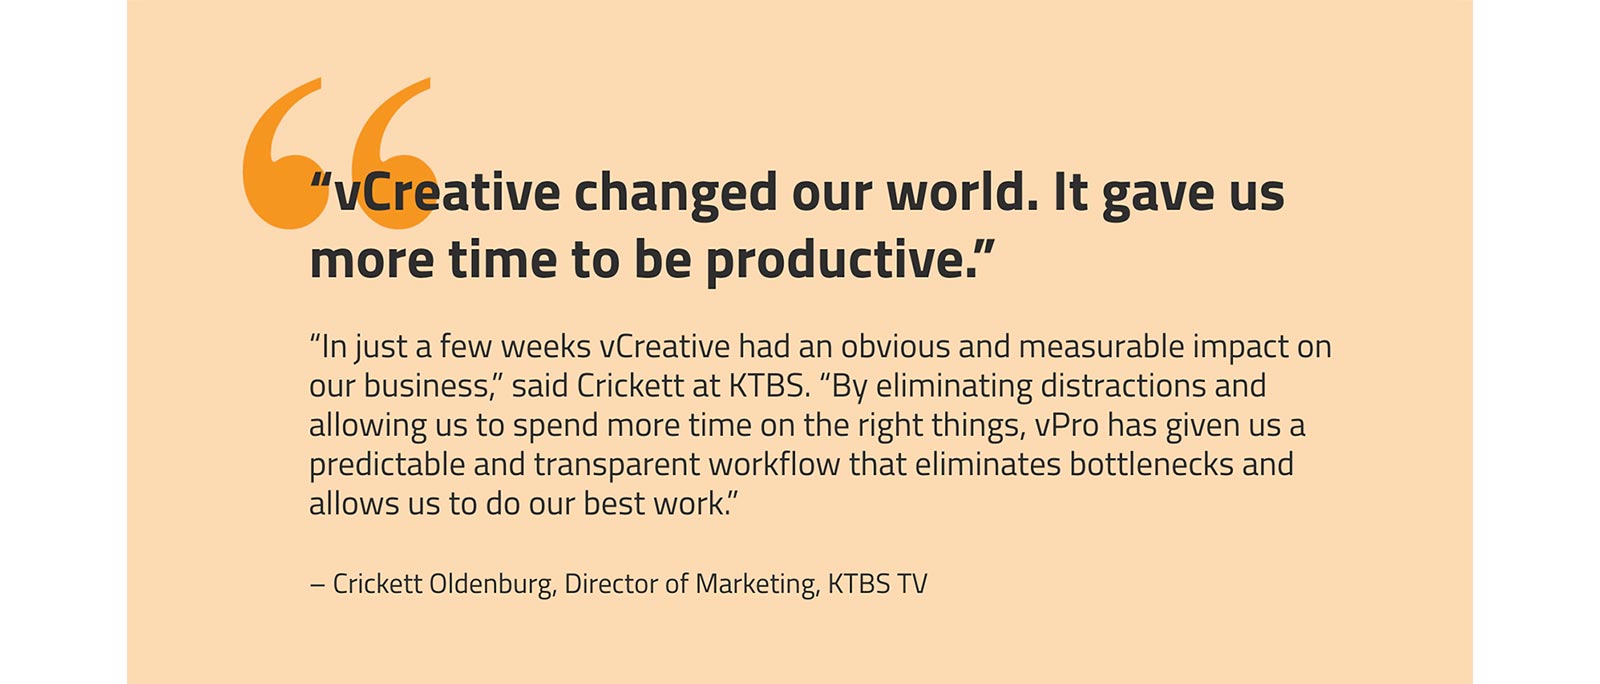 vPro "vCreative changed our world. It gave us more time to be productive."